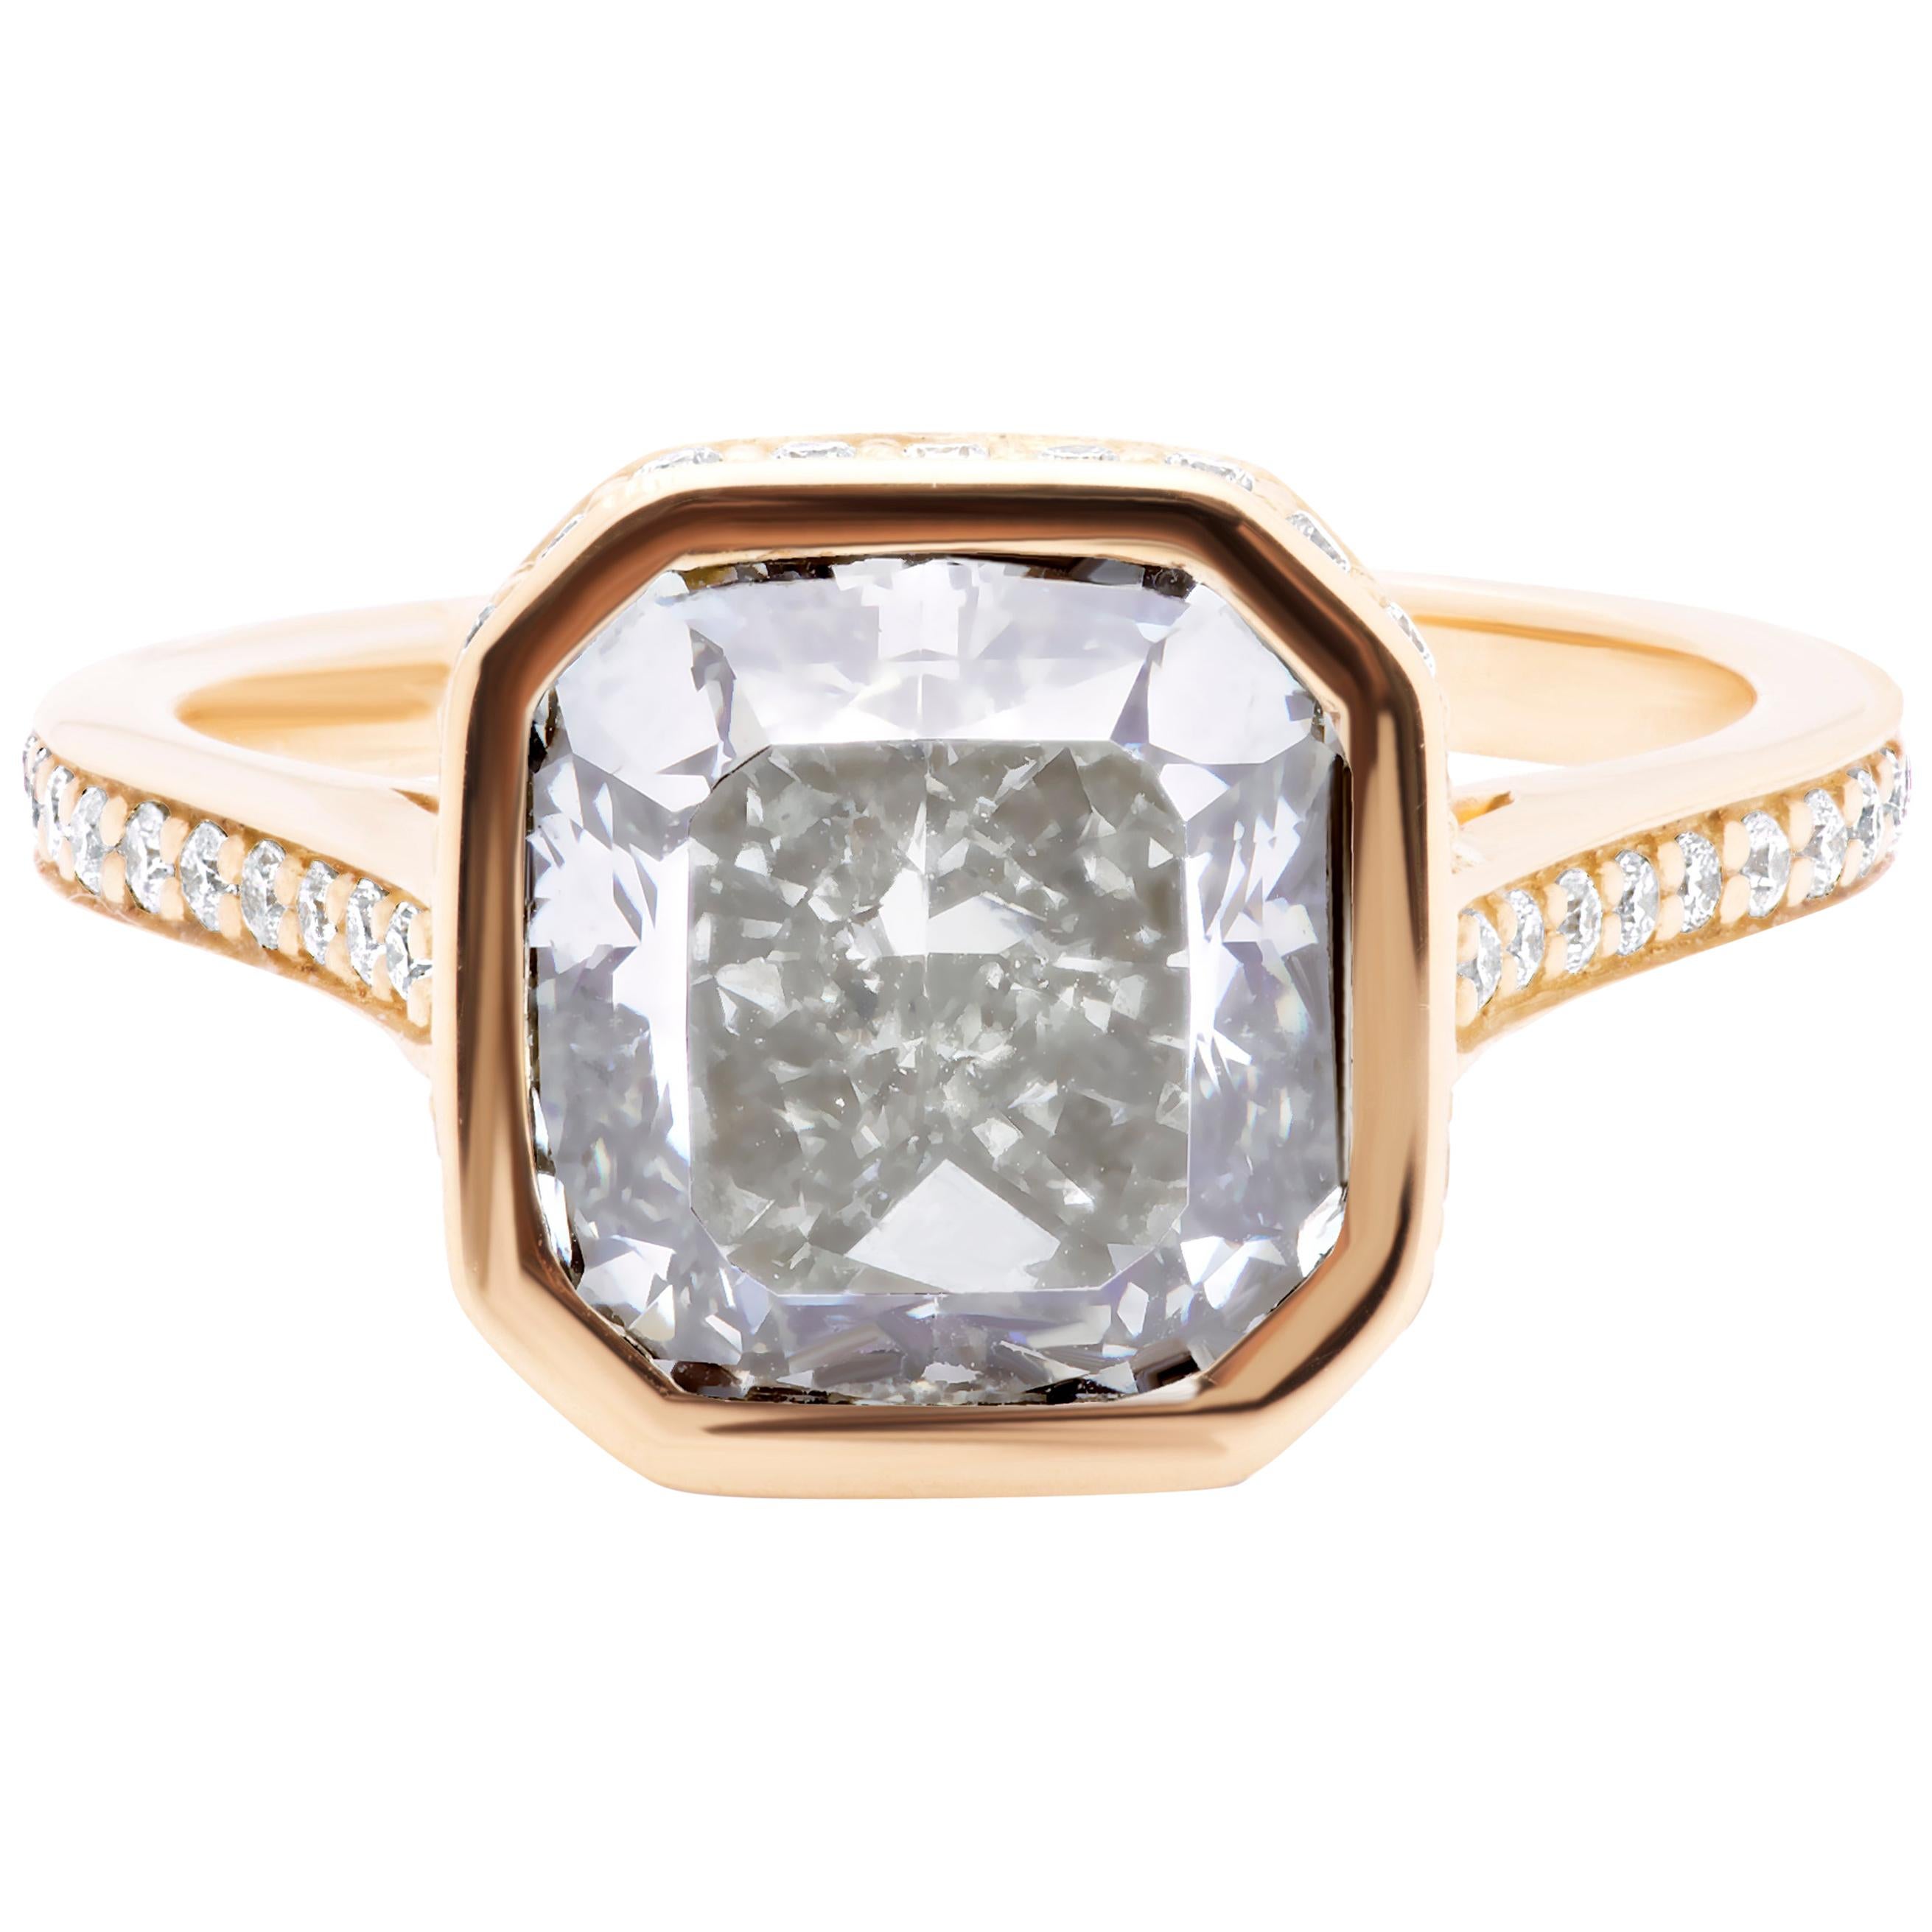 4.55 Carat Very Light Gray Radiant Cut Diamond 18K Yellow Gold Engagement Ring For Sale